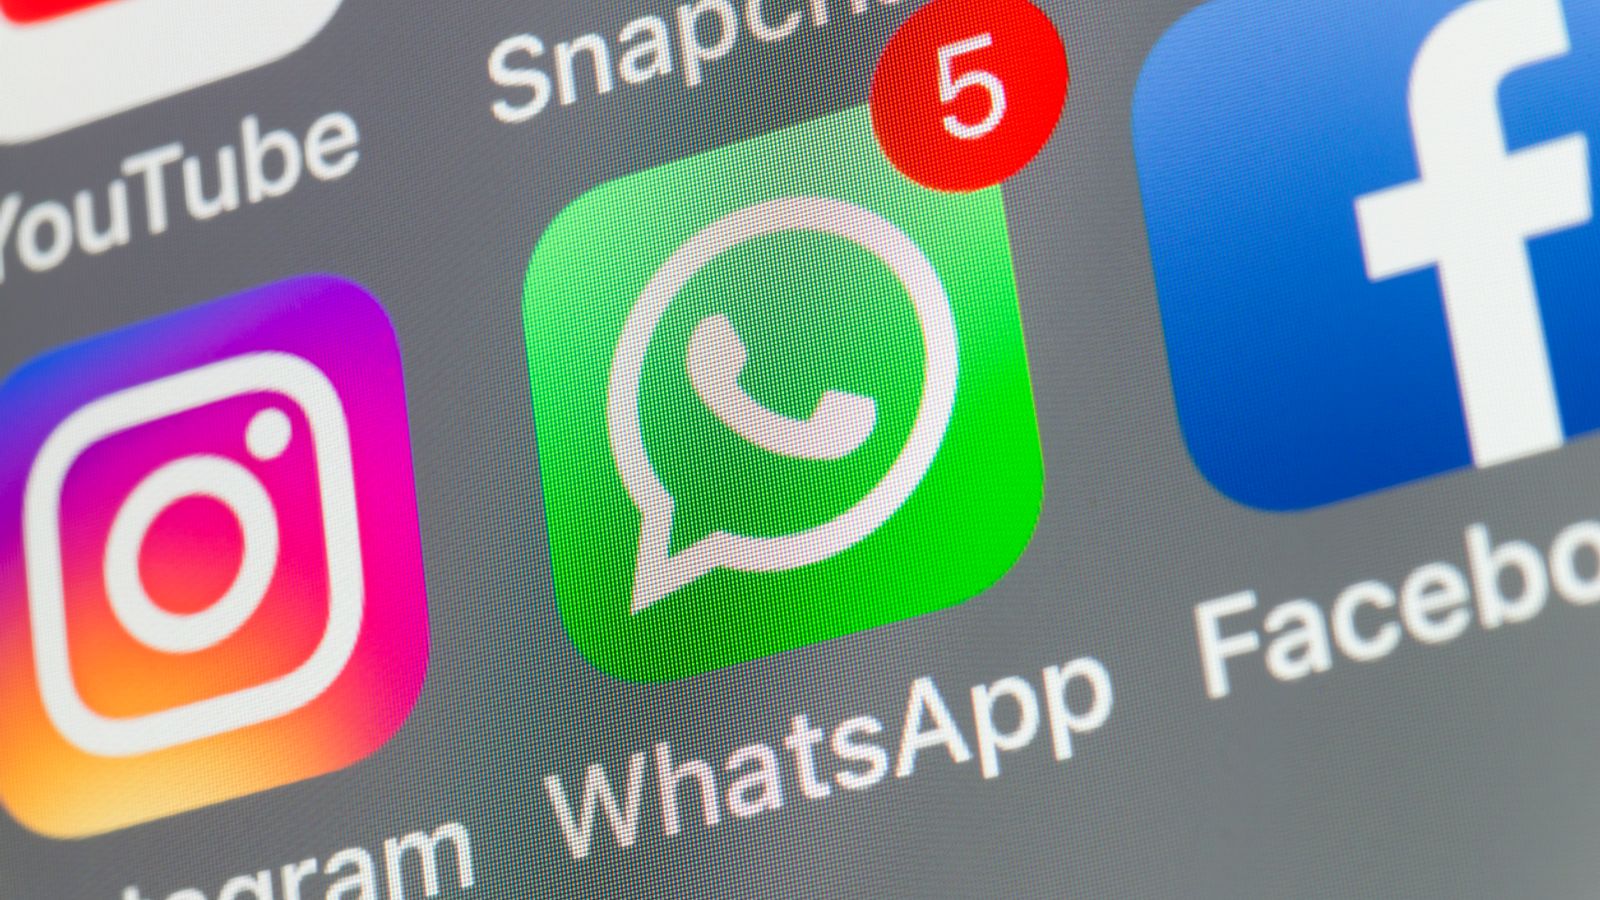 WhatsApp tips to social media monitoring: The online security advice given to MPs